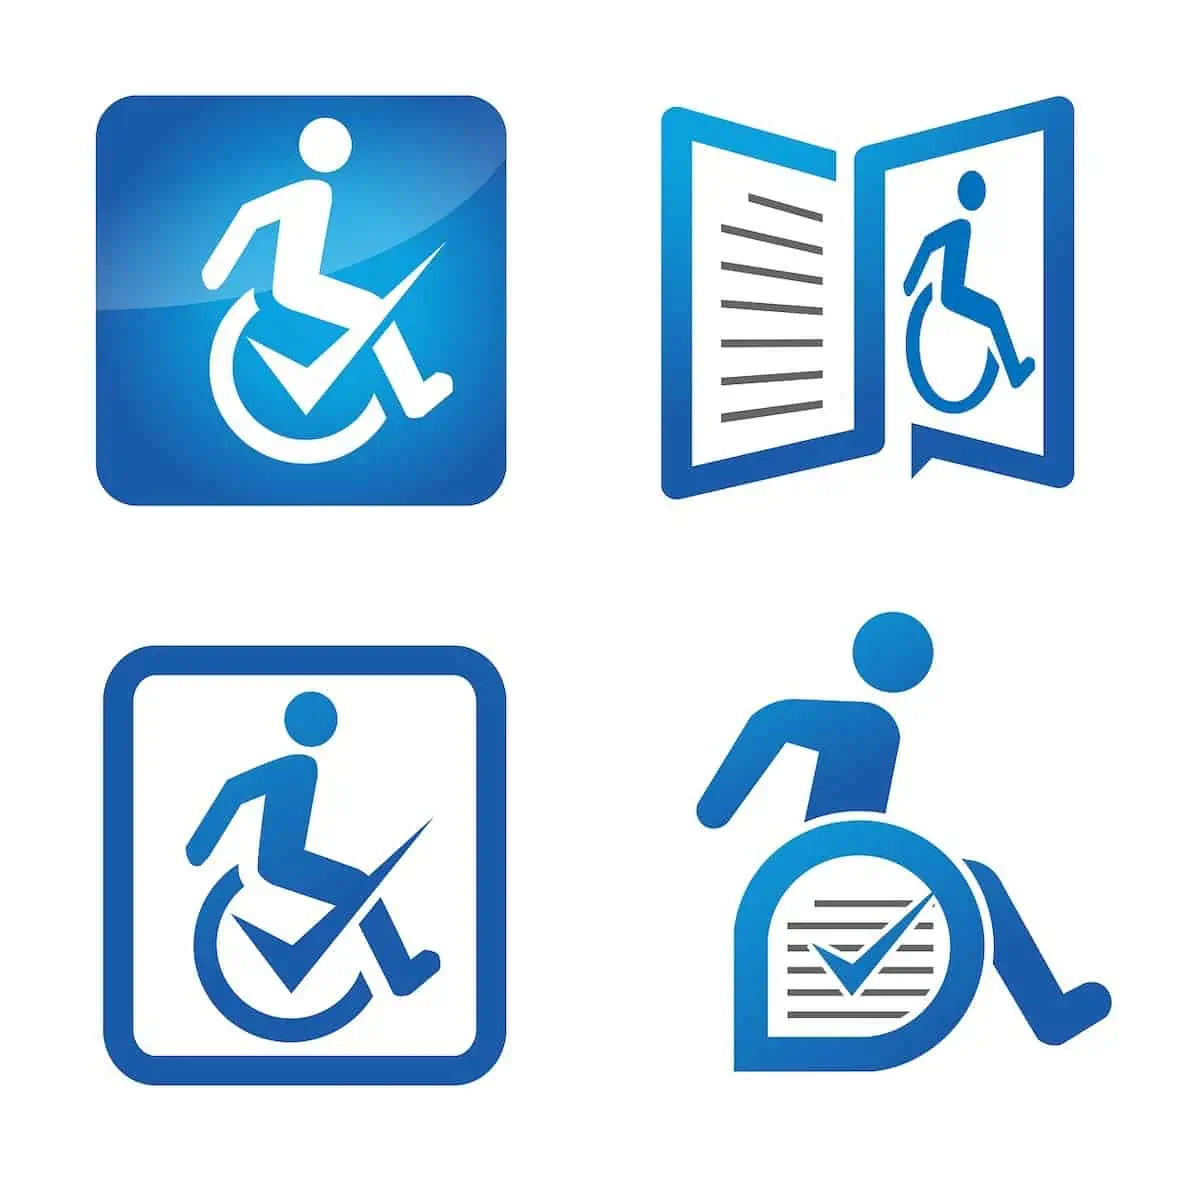 7 Most Wheelchair Accessible U.S. Colleges and Universities!